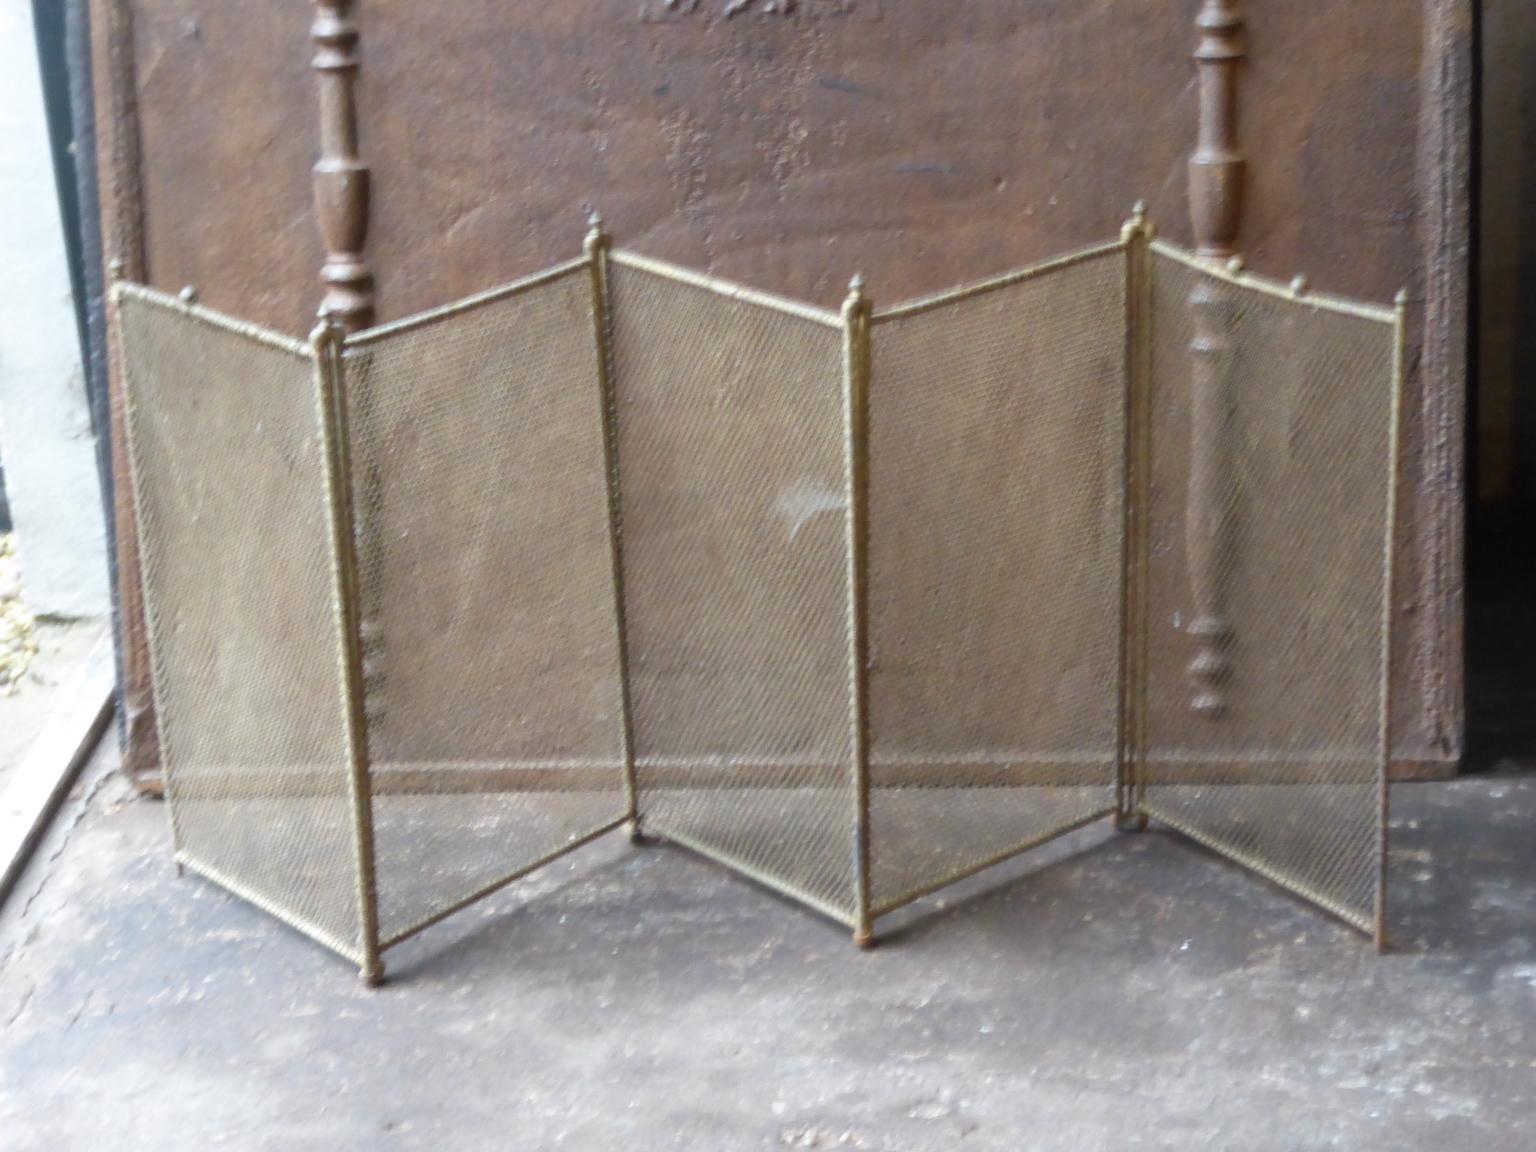 19th century French Napoleon III five-panel fireplace screen. The screen is made of iron and iron mesh. It is in a good condition and is fit for use in front of the fireplace.